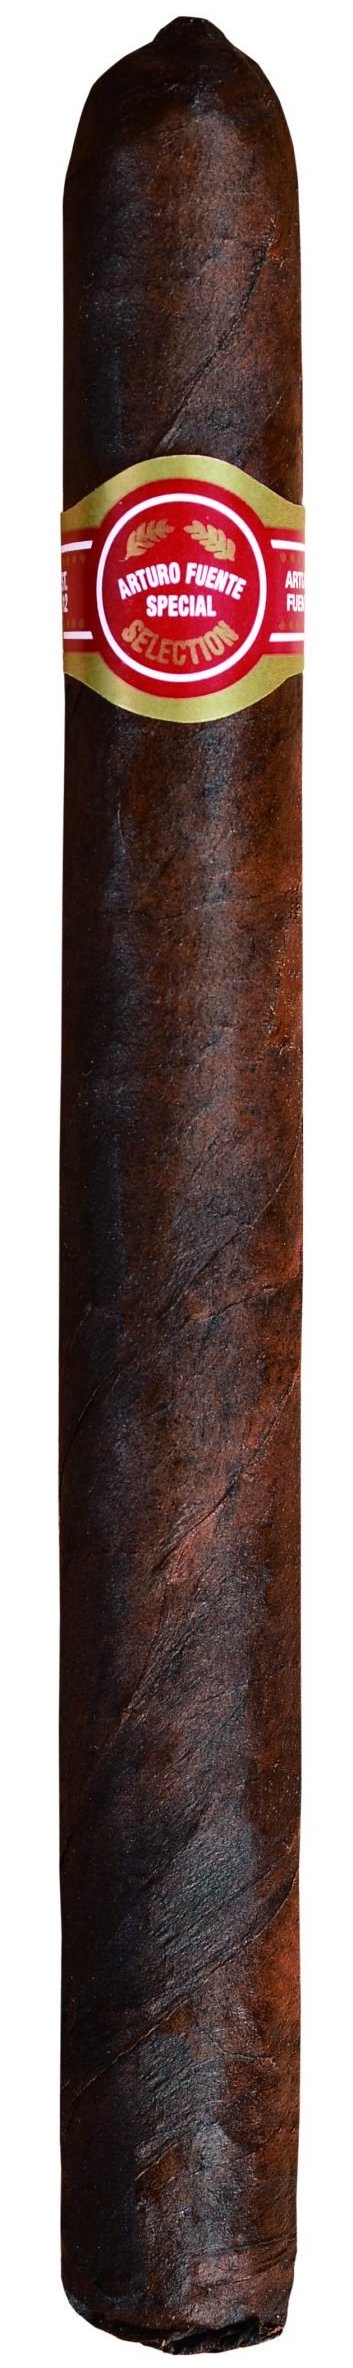 A. Fuente Curly Head Deluxe Maduro Featured Image